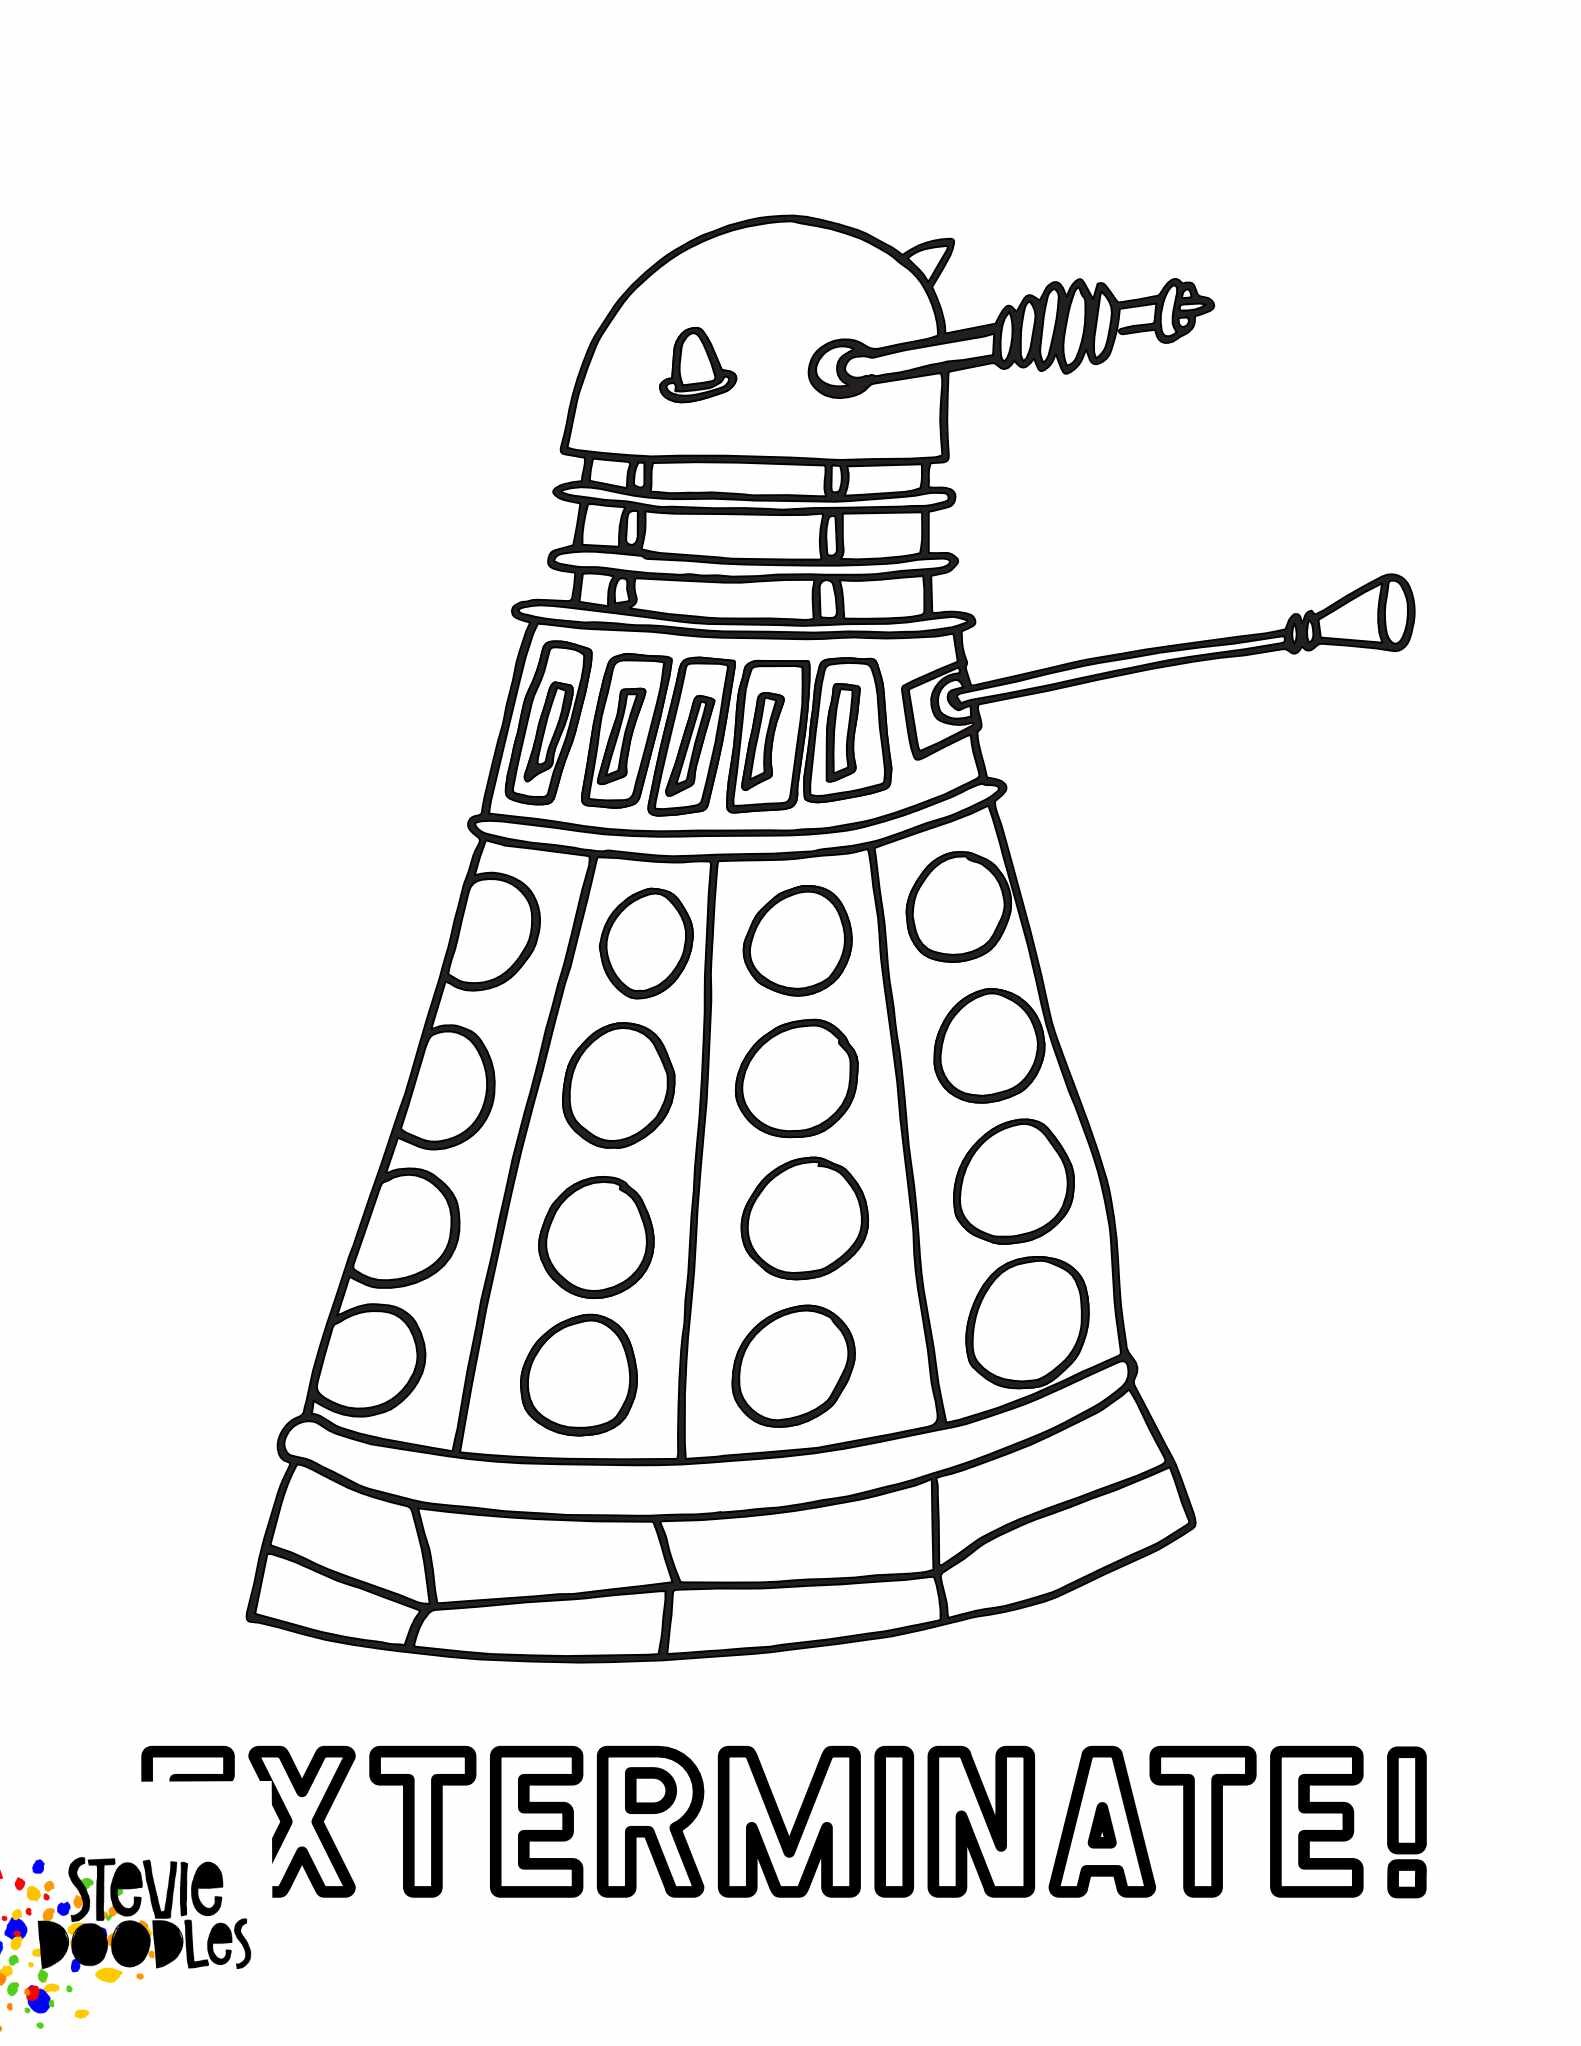 Free Printable Coloring Page - Dr. Who - Inspired Dalek CLICK HERE TO DOWNLOAD THE PAGE ABOVE